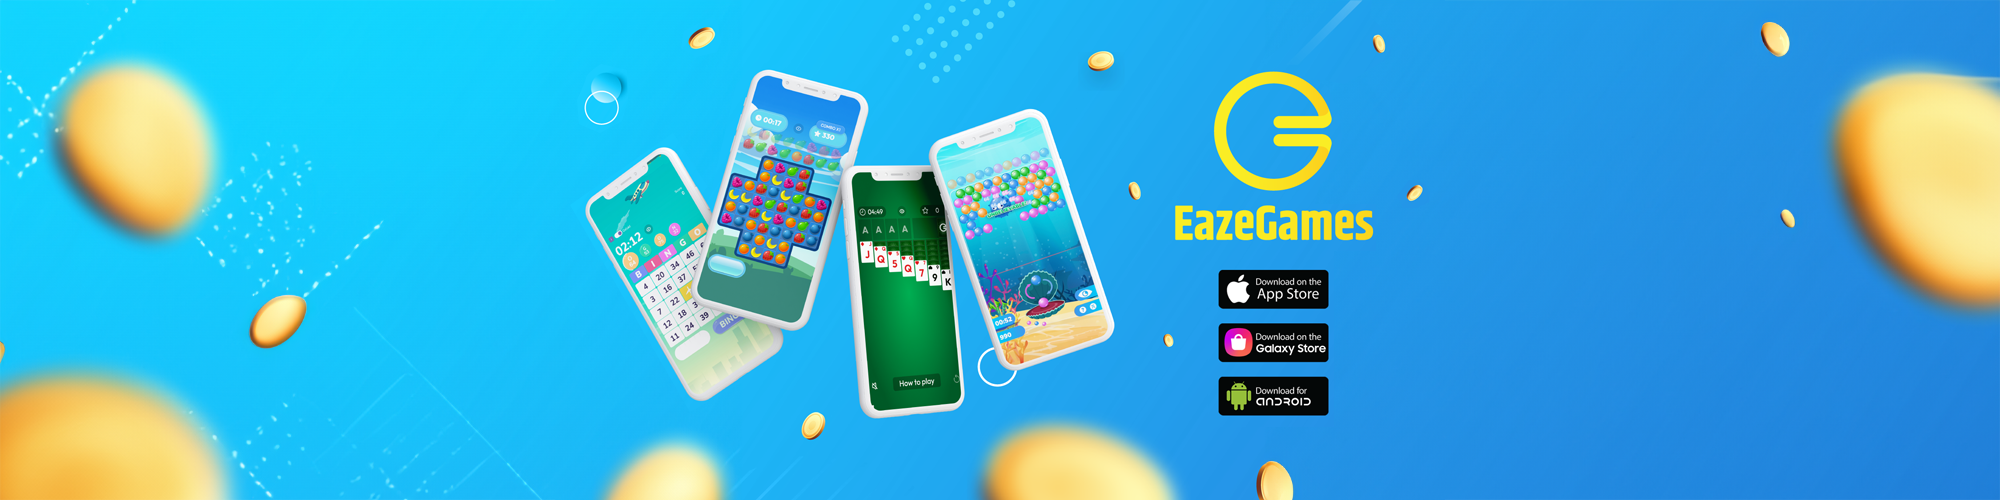 EazeGames – Review – How Does It Work?